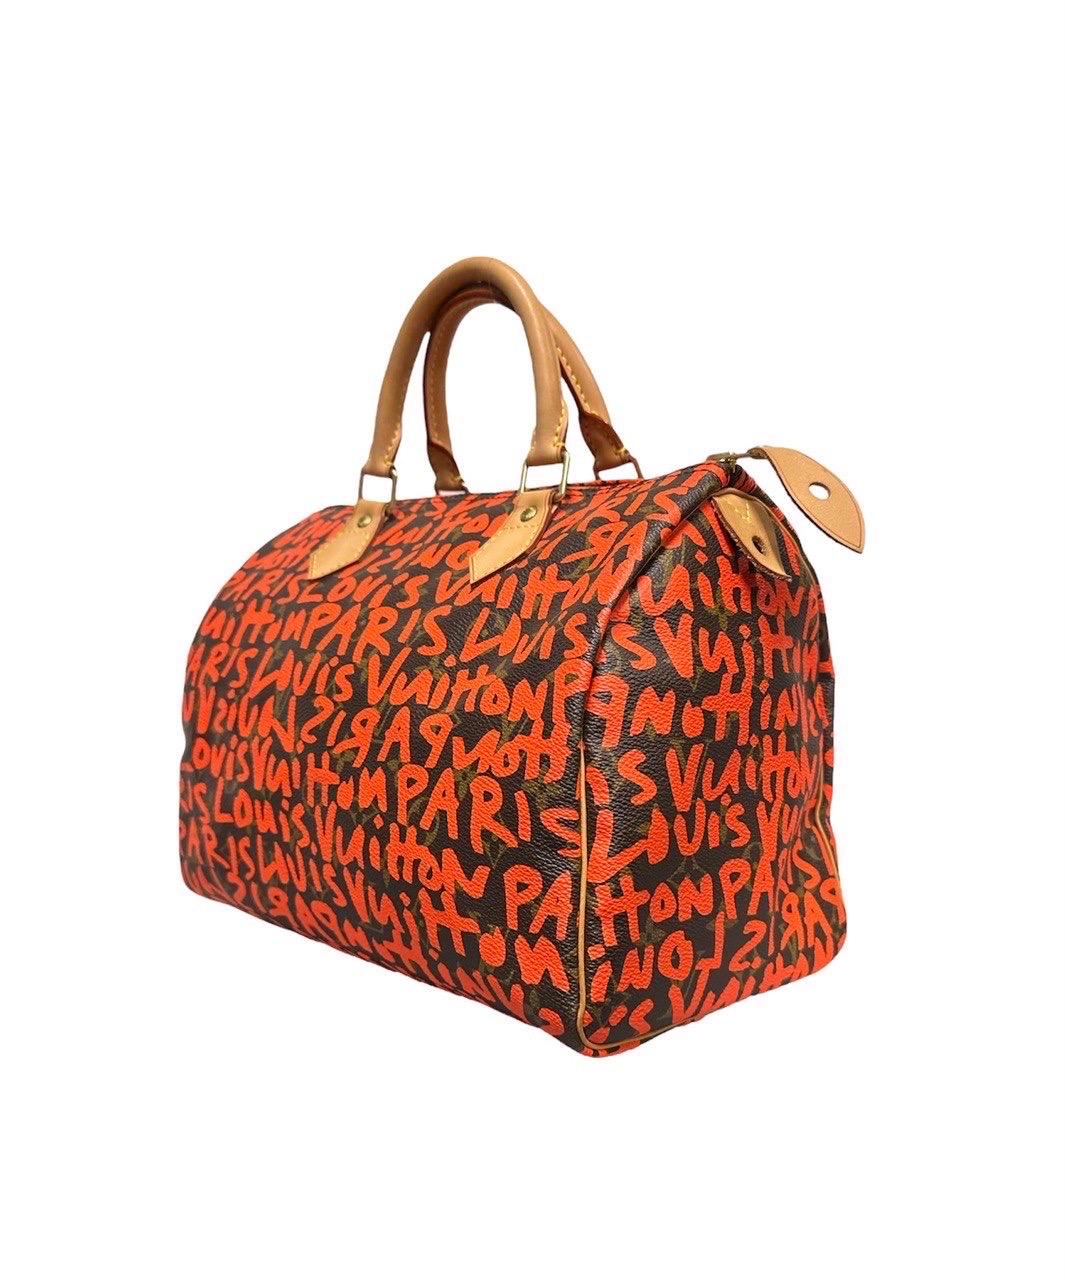 Louis Vuitton bag, Speedy 30 x Stephen Sprouse model in limited edition, made in the classic monogram canvas with orange graffiti print and gold hardware. Equipped with double handle in cowhide to wear the bag by hand. Internally covered in brown